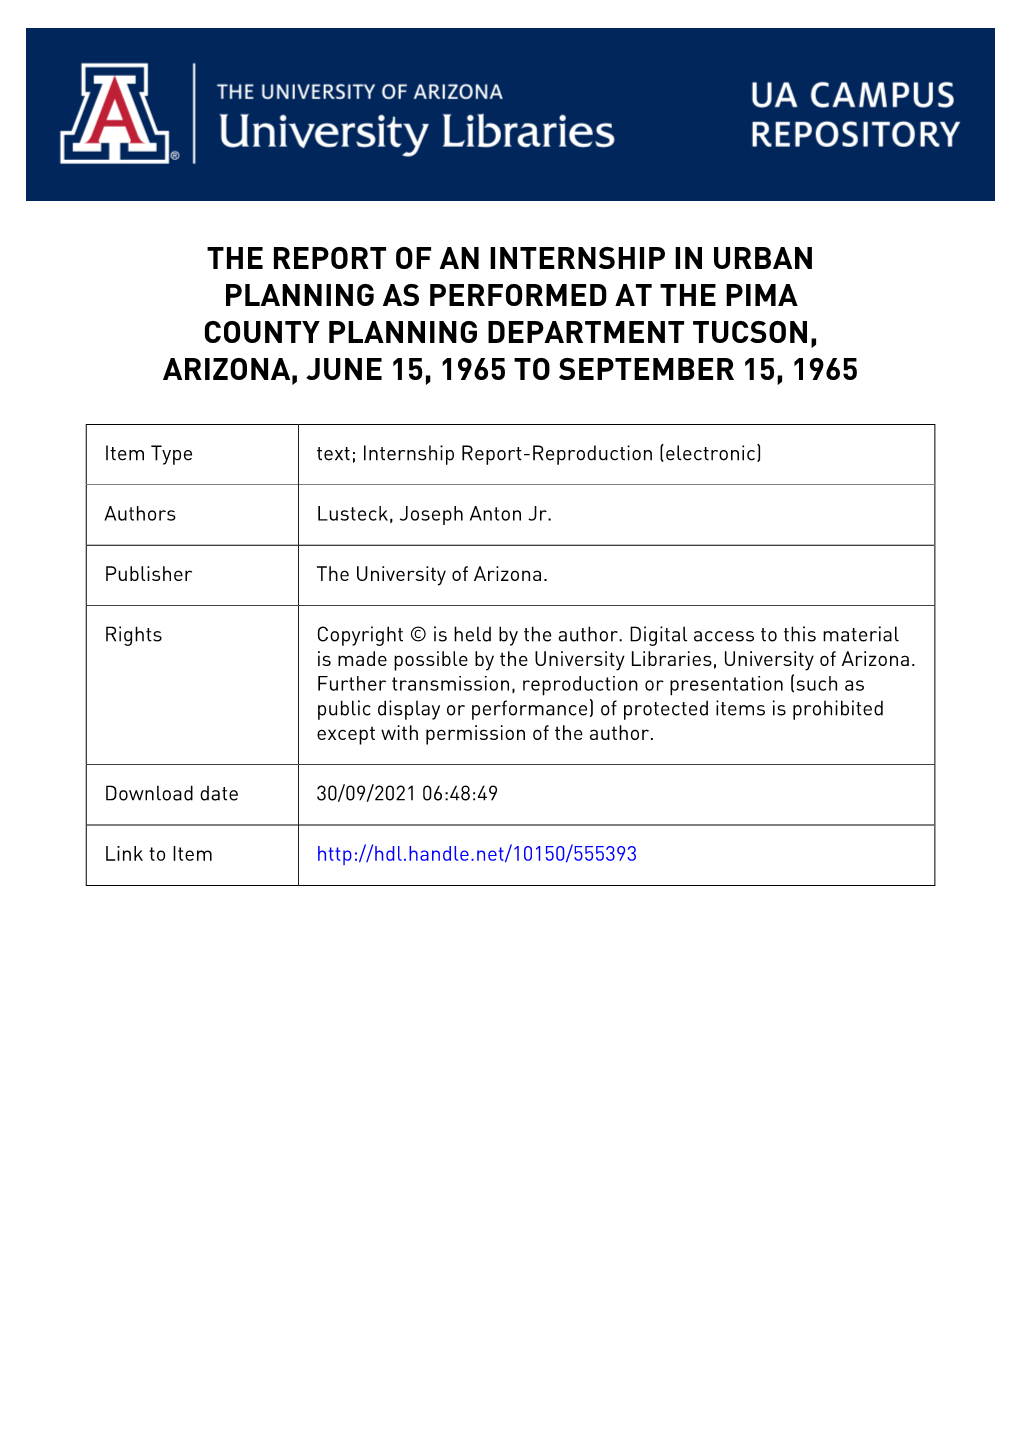 THE REPORT of an INTERNSHIP in Izzmi FWHNING AS PERFORMED